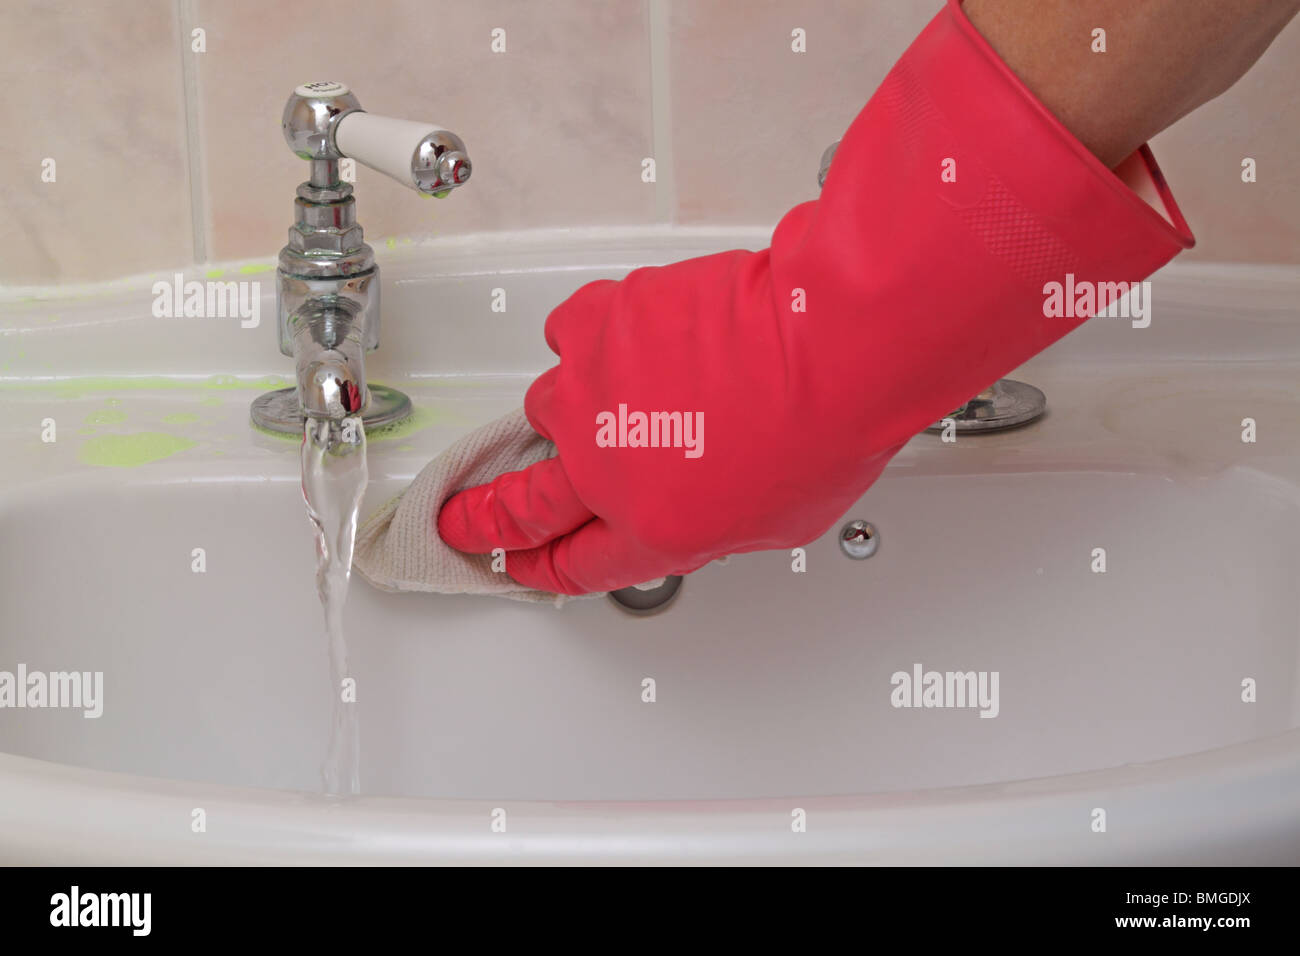 man wearing rubber gloves while cleaning the bathroom sink Stock Photo